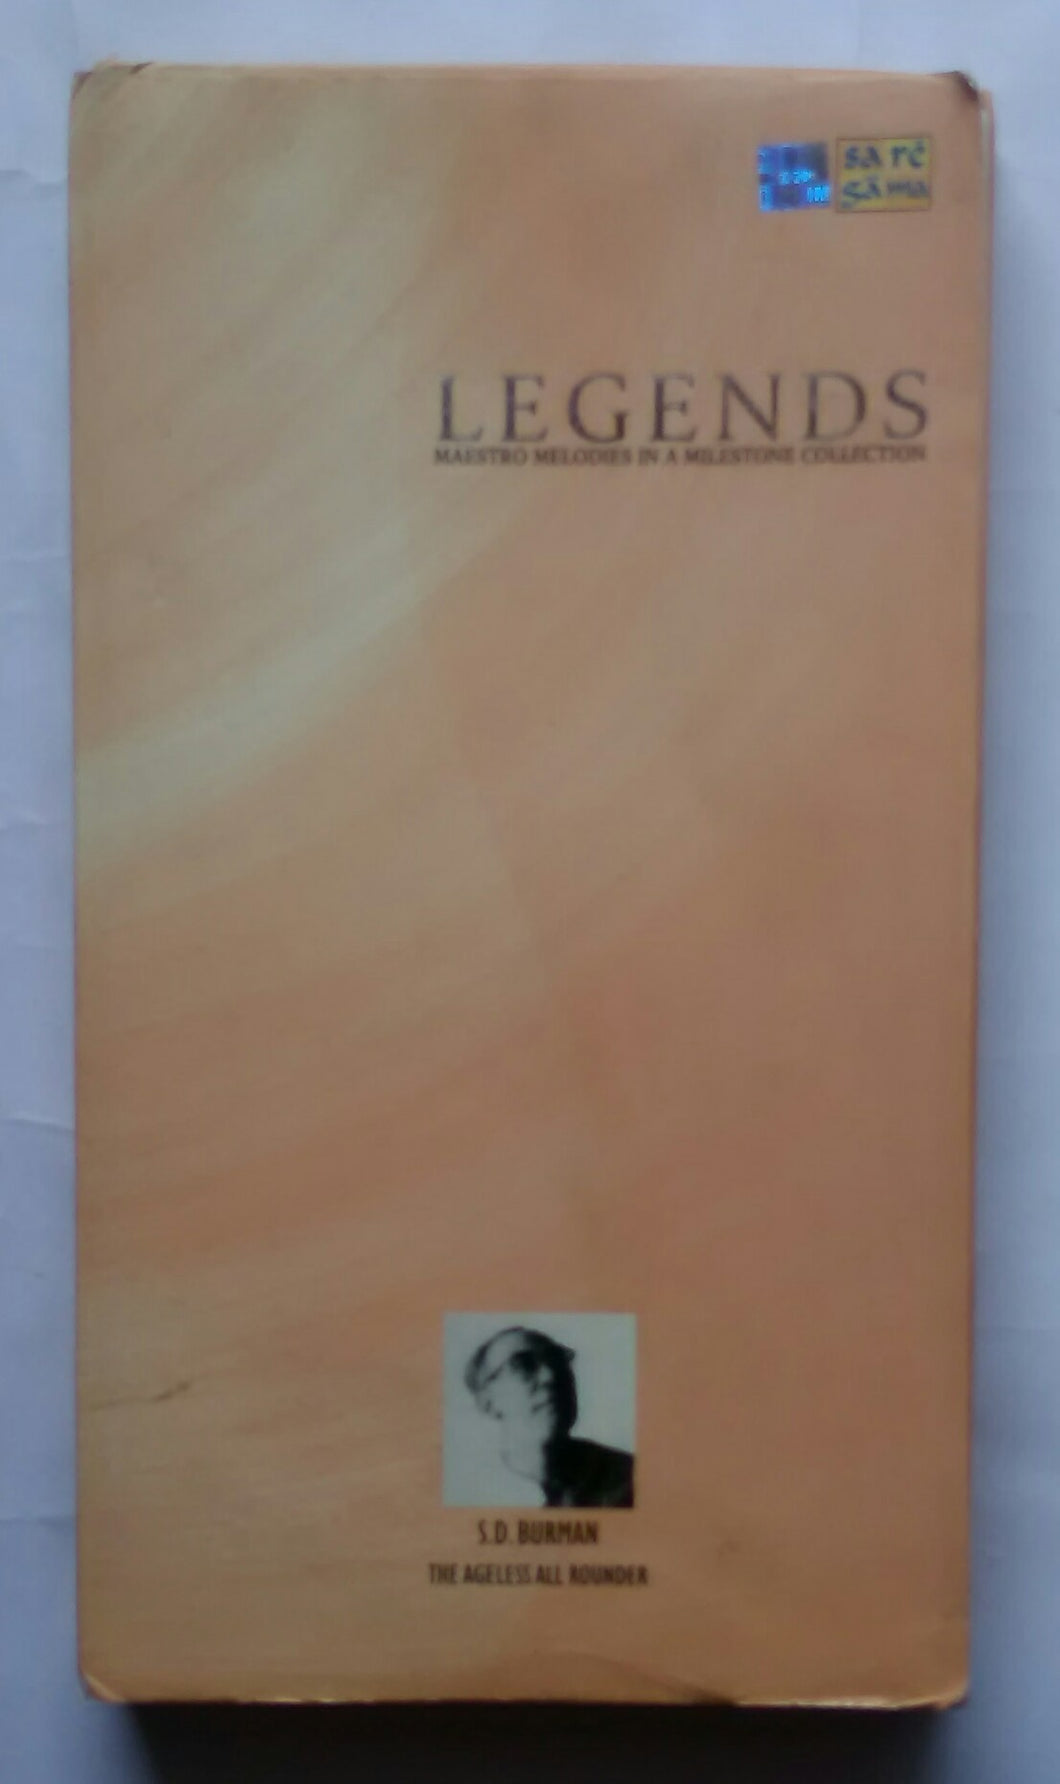 Legends - Maestro Melodies In A Milestone Collection 